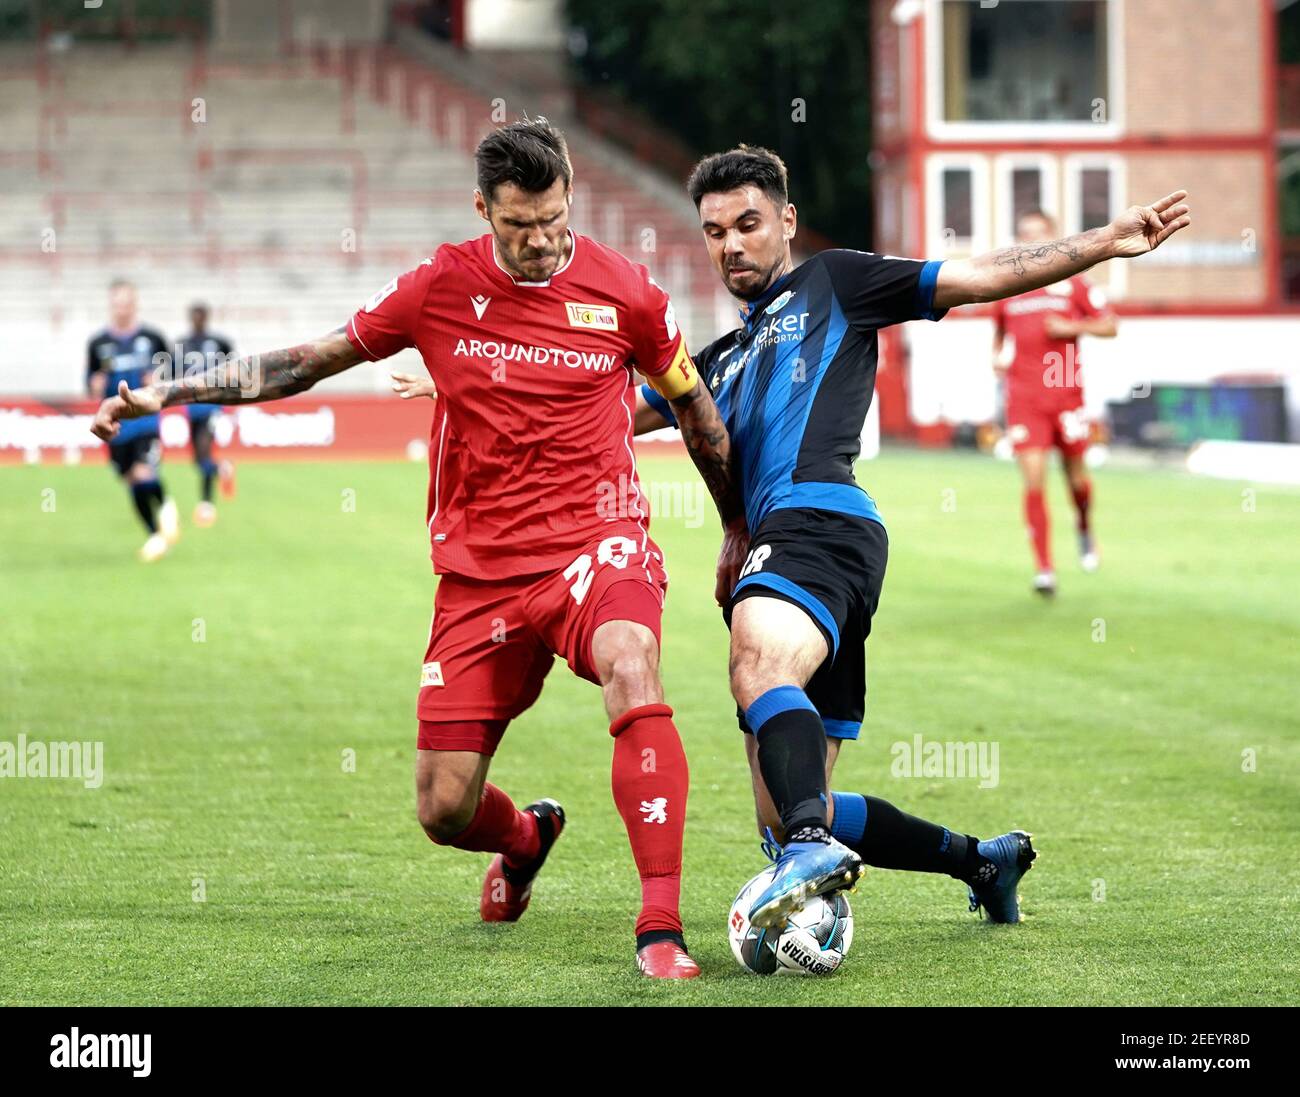 Soccer Football - Bundesliga - 1. FC Union Berlin v SC Paderborn - Stadion An der Alten Forsterei, Berlin, Germany - June 16, 2020 FC Union Berlin's Christopher Trimmel in action with SC Paderborn's Gerrit Holtmann, following the resumption of play behind closed doors after the outbreak of the coronavirus disease (COVID-19)  Kay Nietfeld/Pool via REUTERS  DFL regulations prohibit any use of photographs as image sequences and/or quasi-video Stock Photo